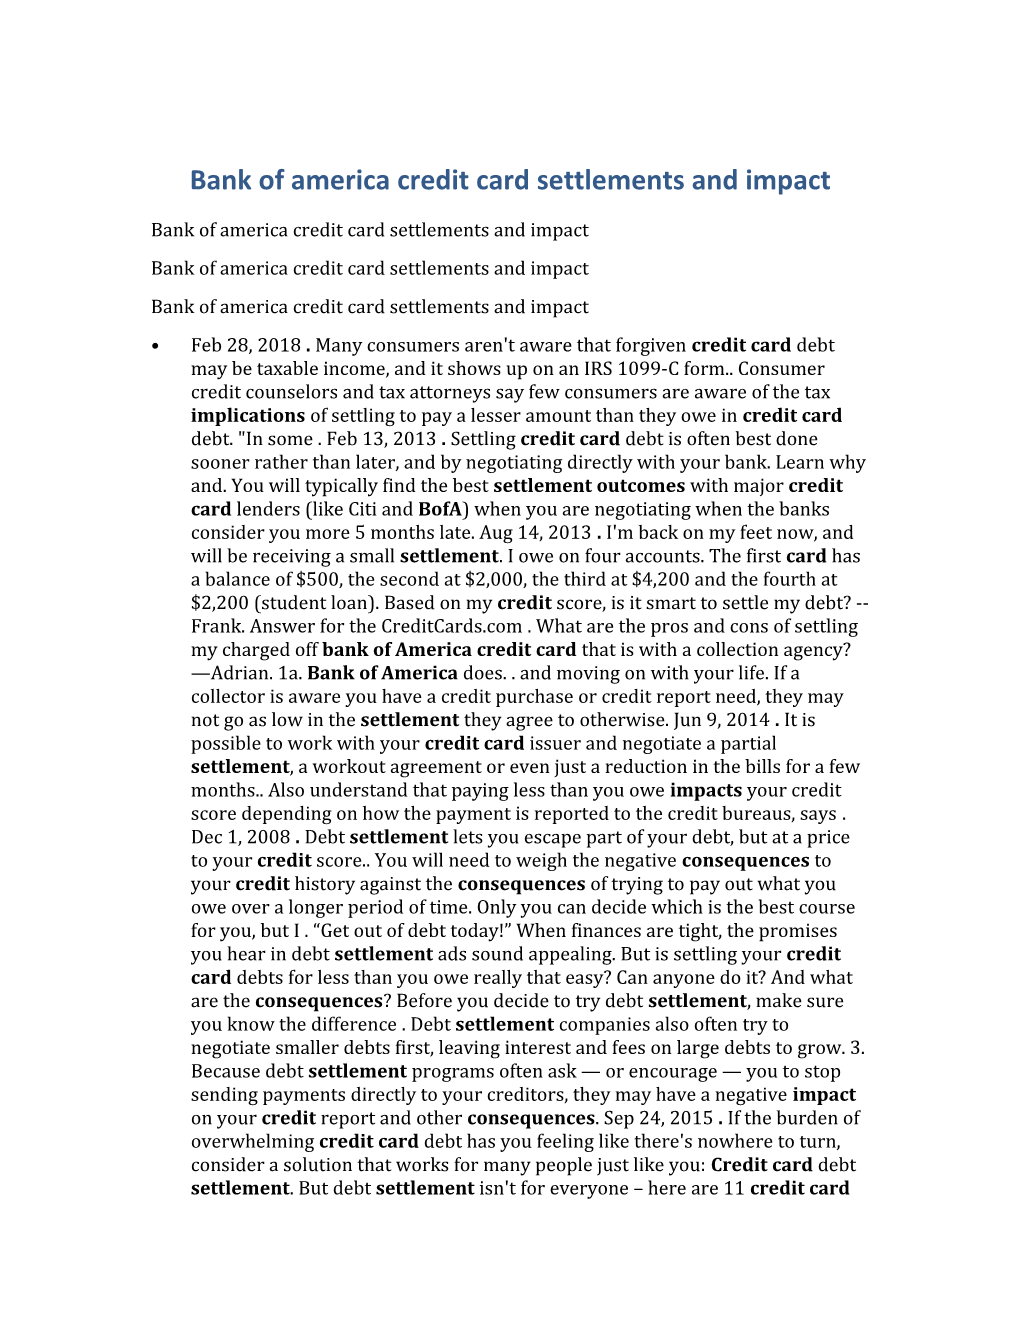 Bank of America Credit Card Settlements and Impact